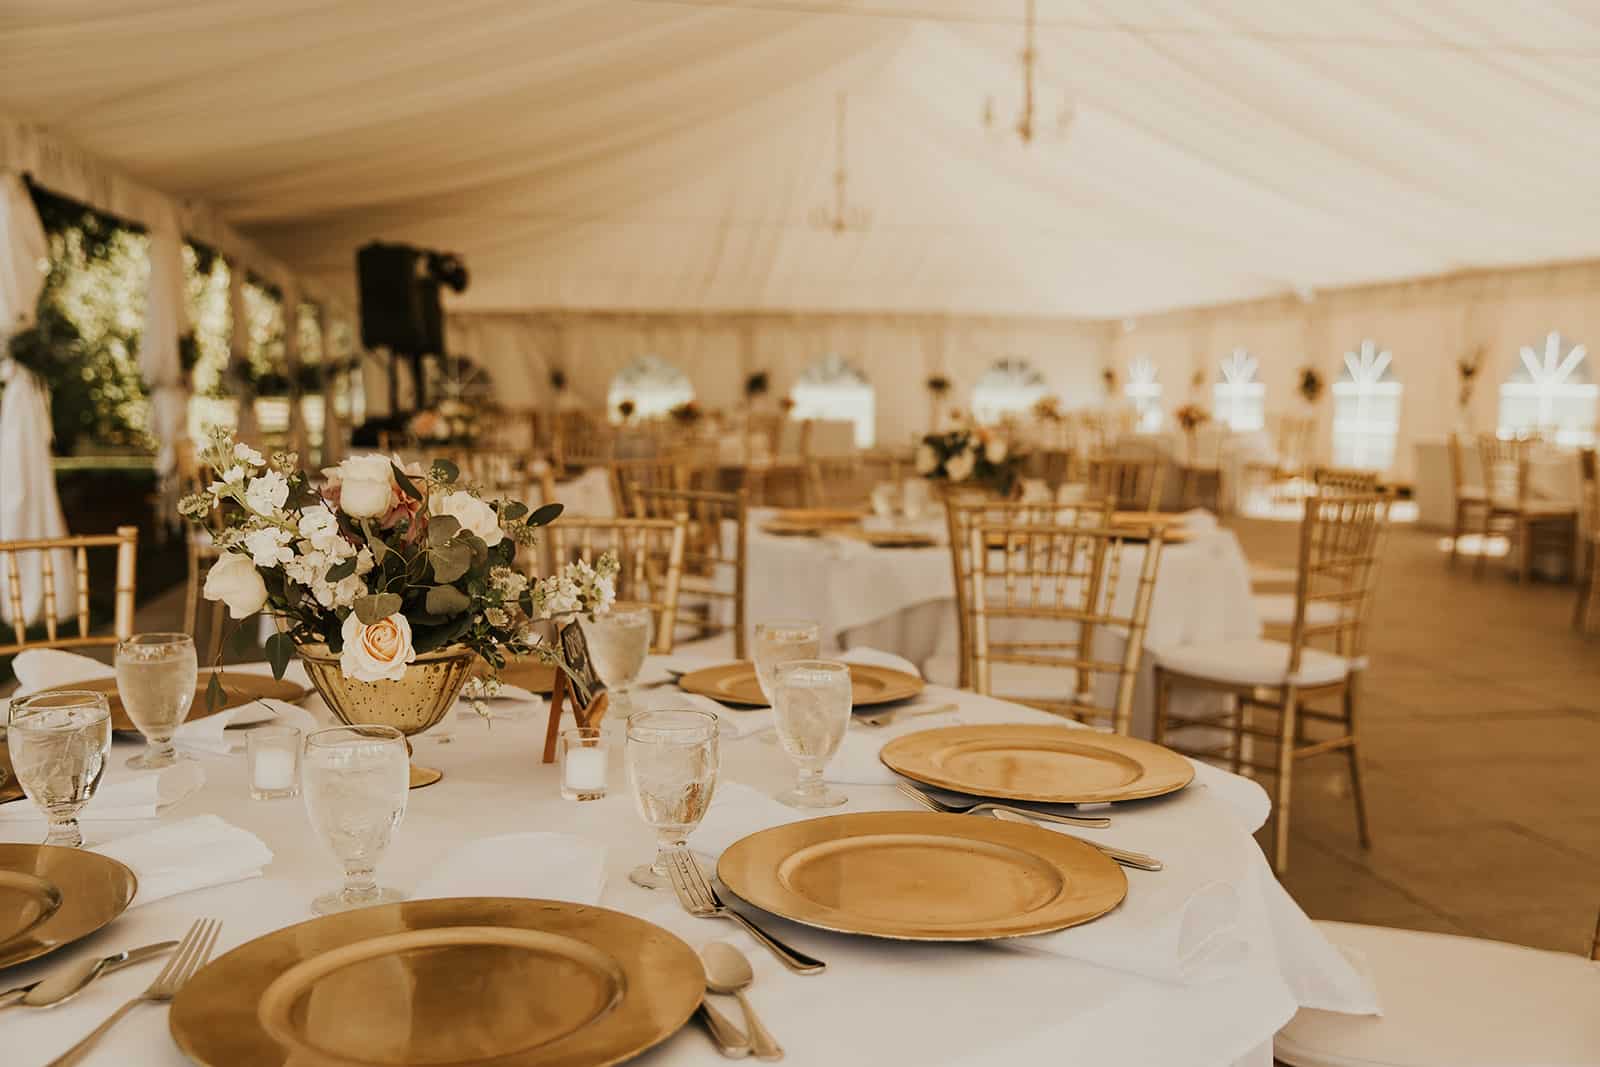 outdoor wedding tent, wedding tent decor, classic wedding centerpiece, romantic wedding centerpiece, vintage wedding centerpiece, reception tables, reception guest table decor, gold and white wedding, gold and ivory wedding, cream colored flowers